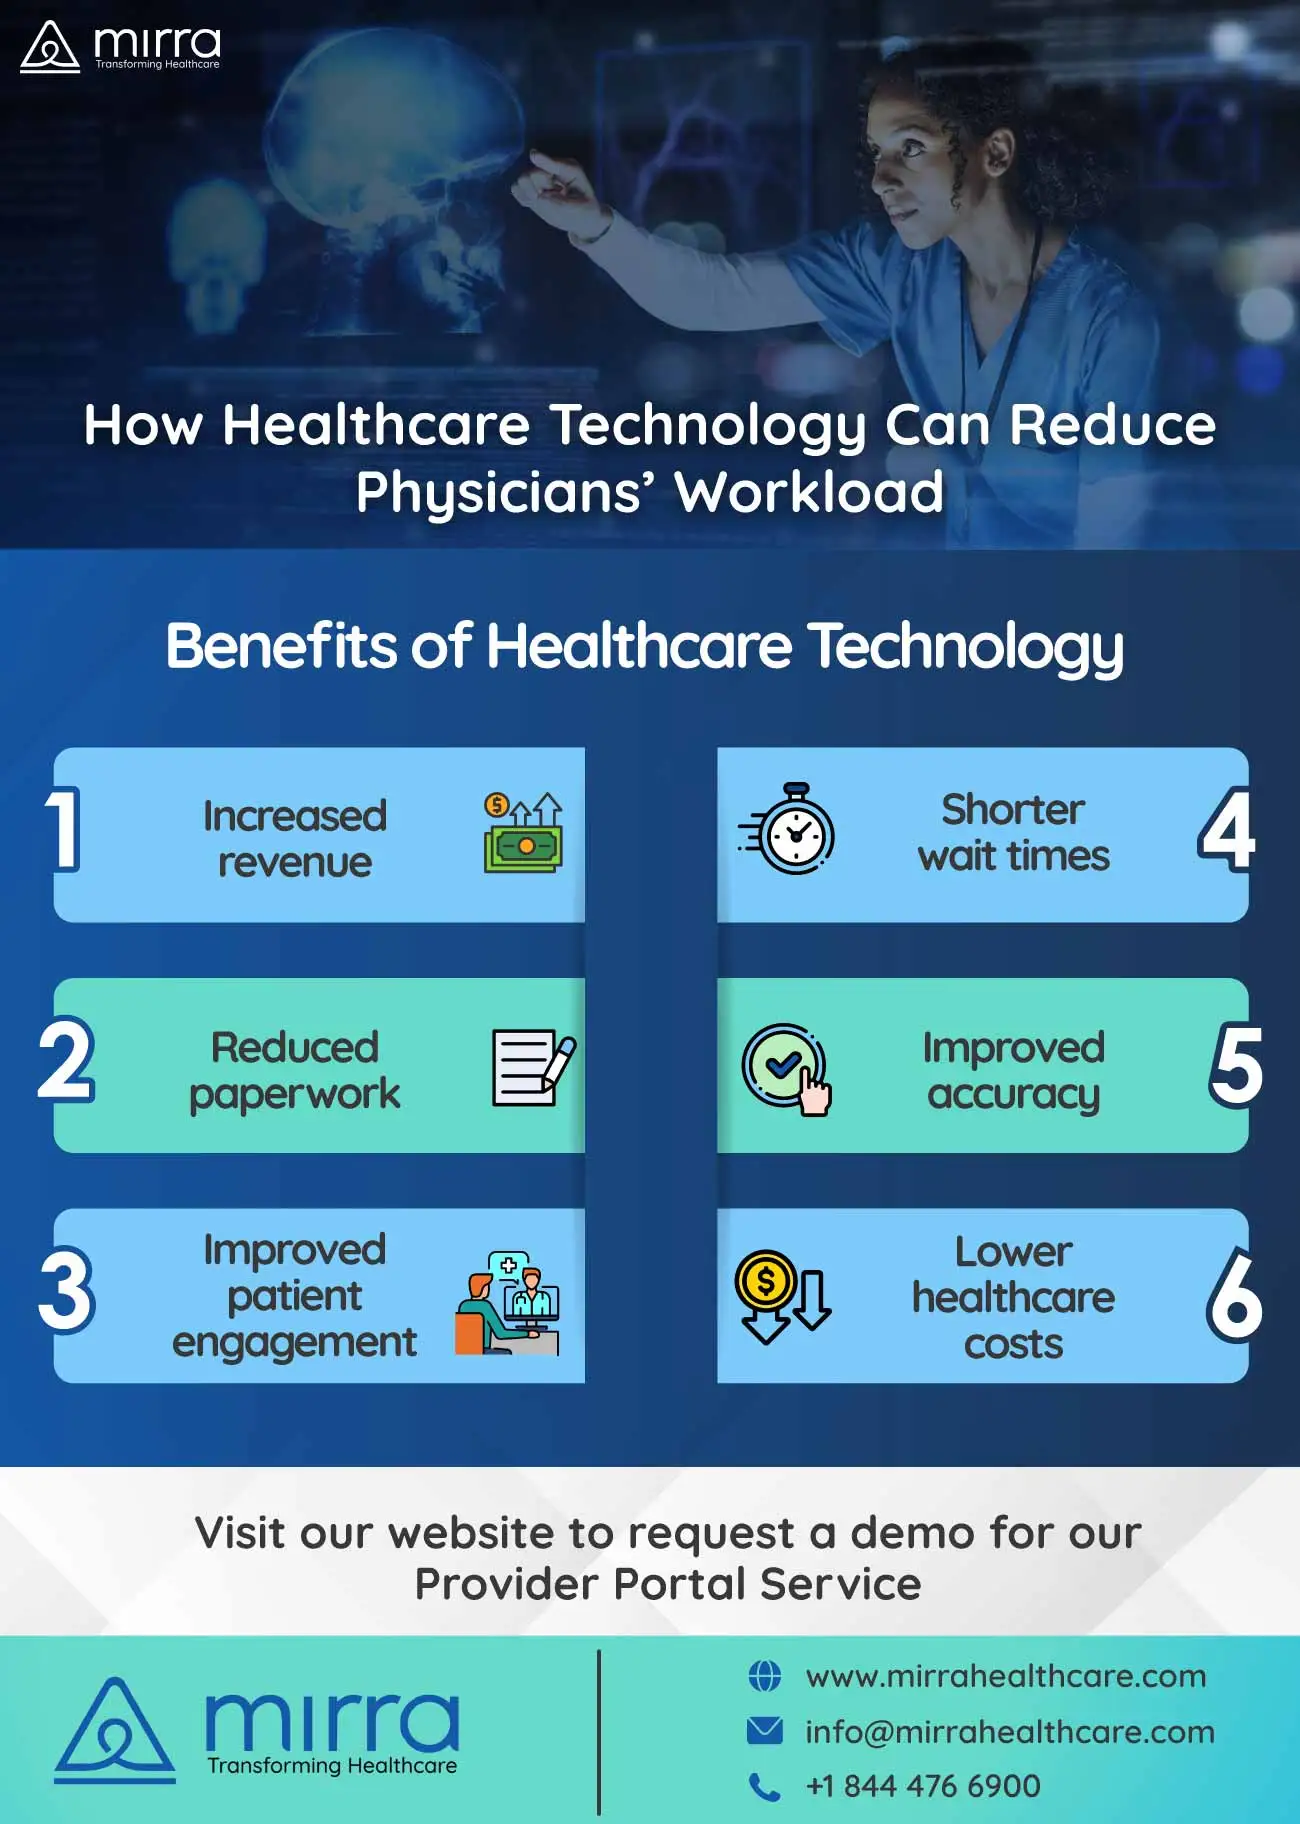 How Can Mirra’s Provider Portal Service Help Physicians